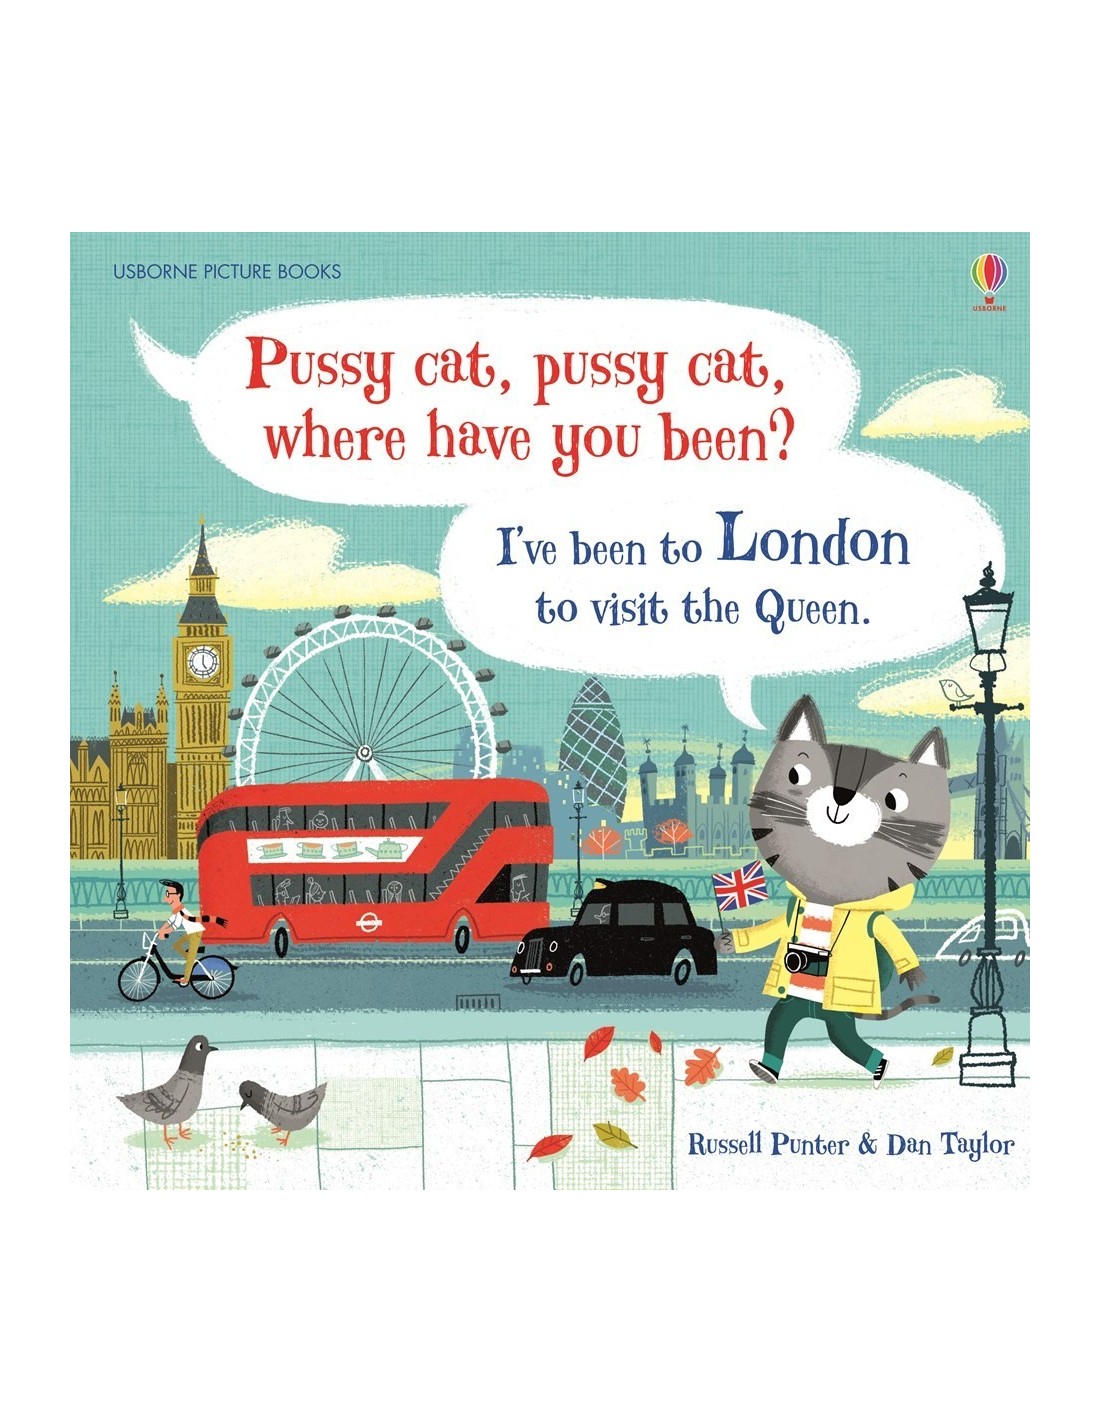 Pussy cat, pussy cat, where have you been? I've been to London to visit the queen.